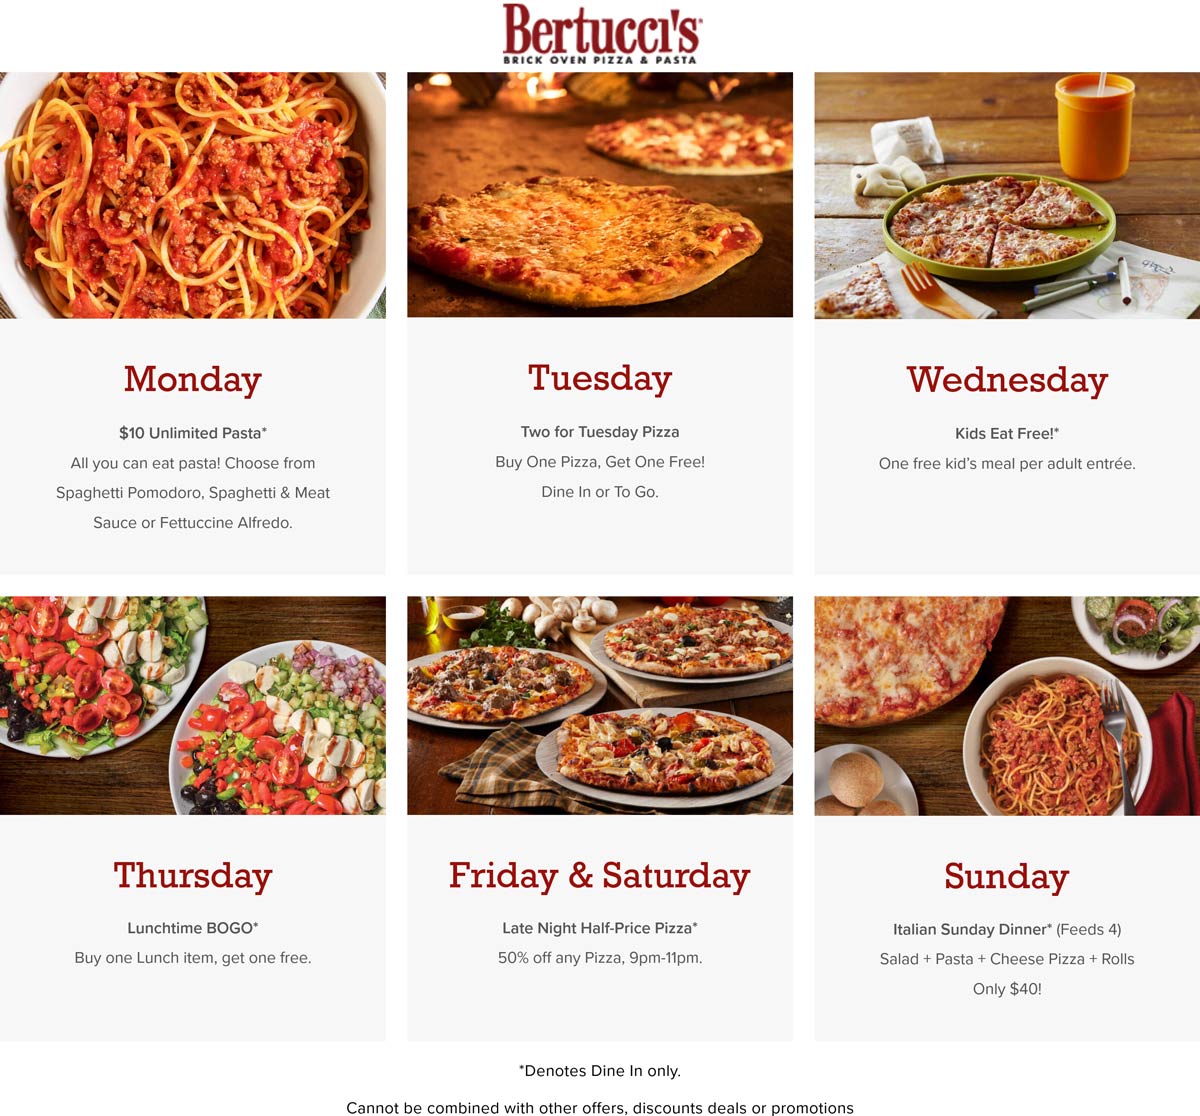 Bertuccis coupons & promo code for [December 2022]